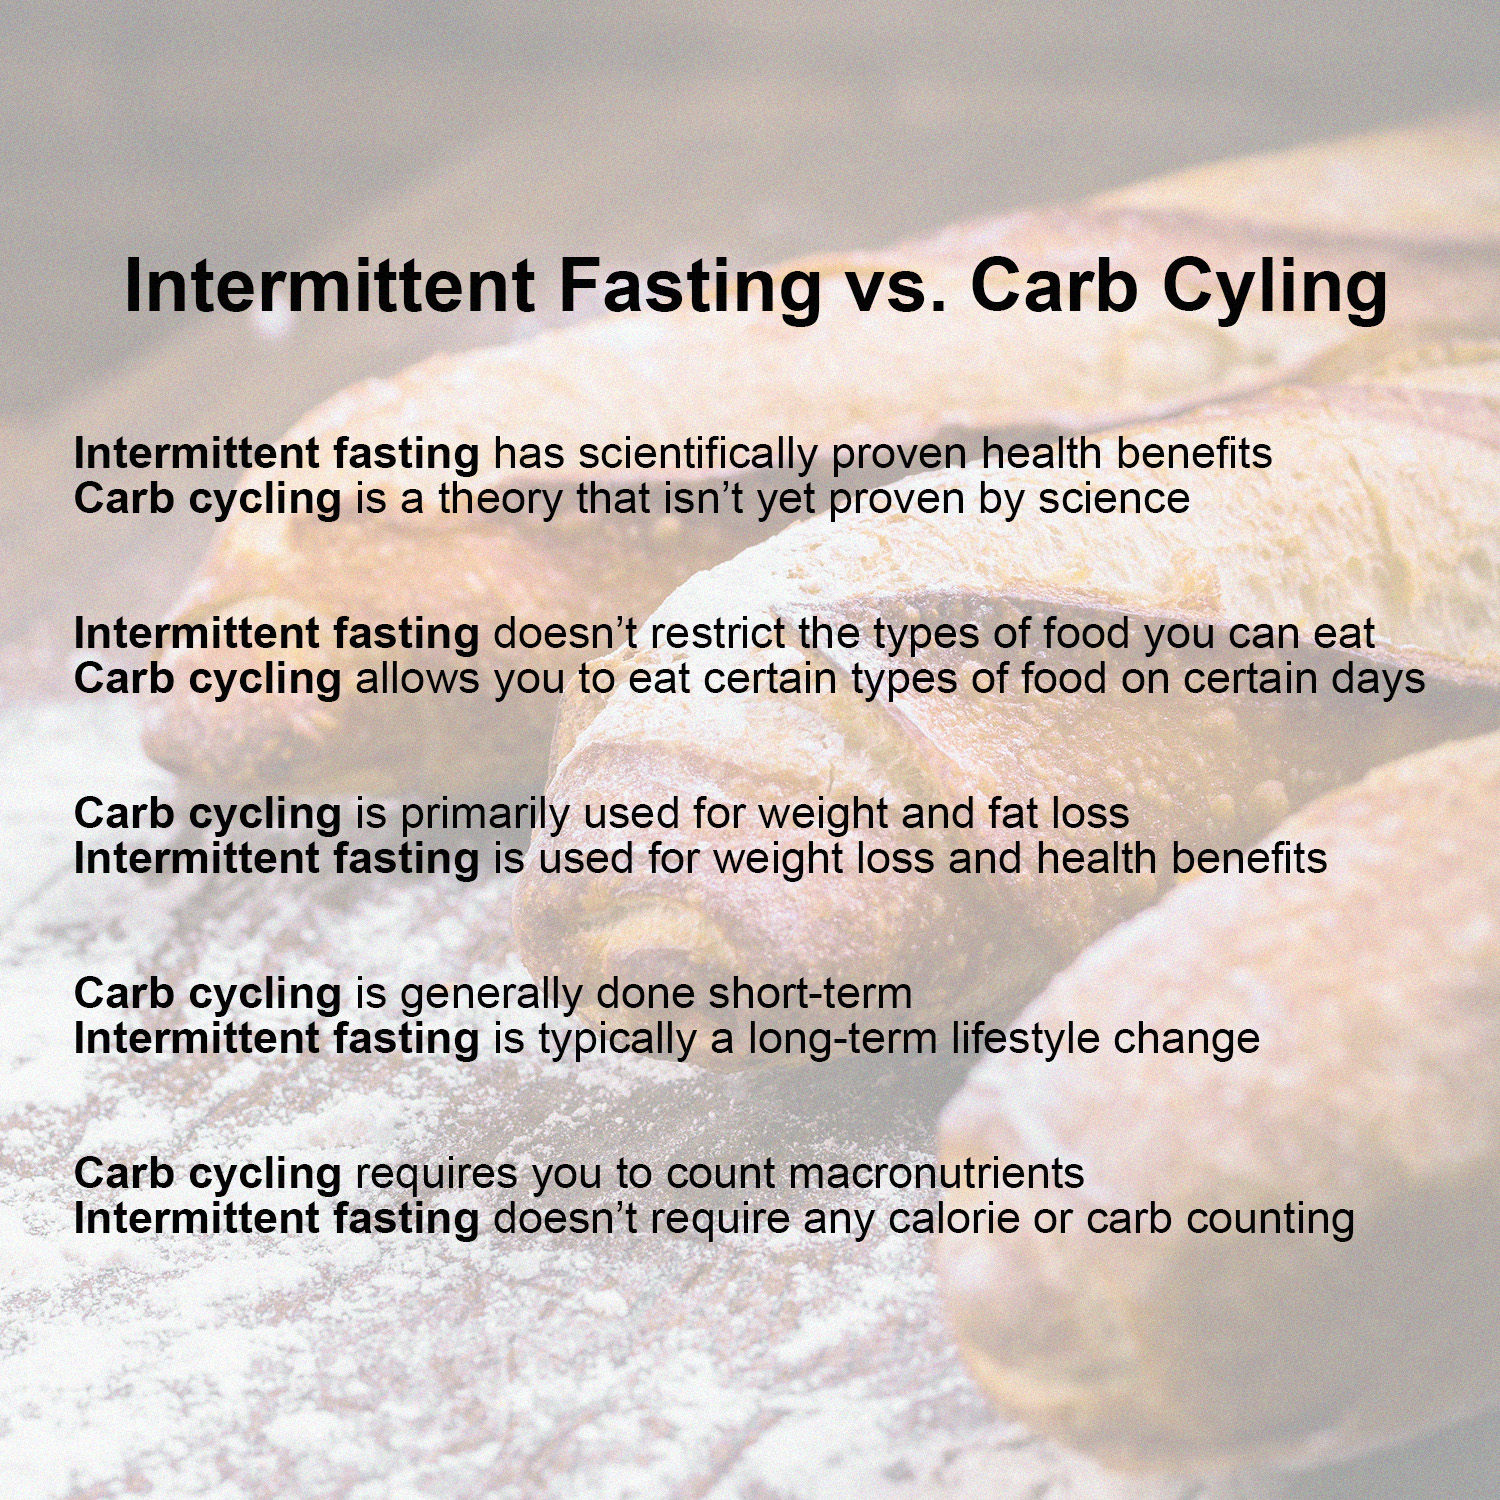 cheat day intermittent fasting